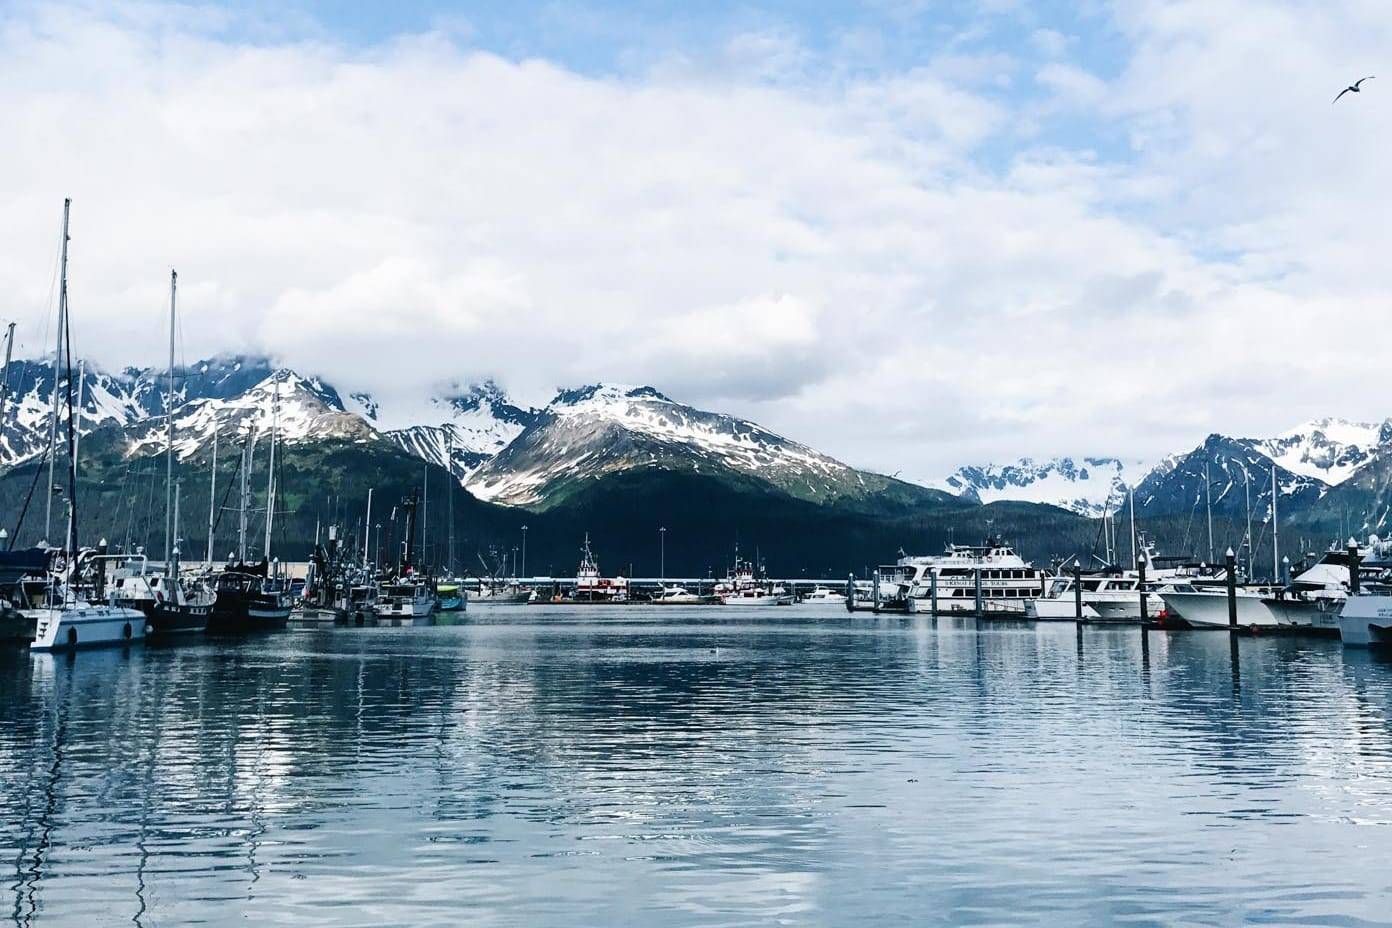 A calm lake at a luxury yacht dock nestled in a valley surrounded by snow-capped mountains.